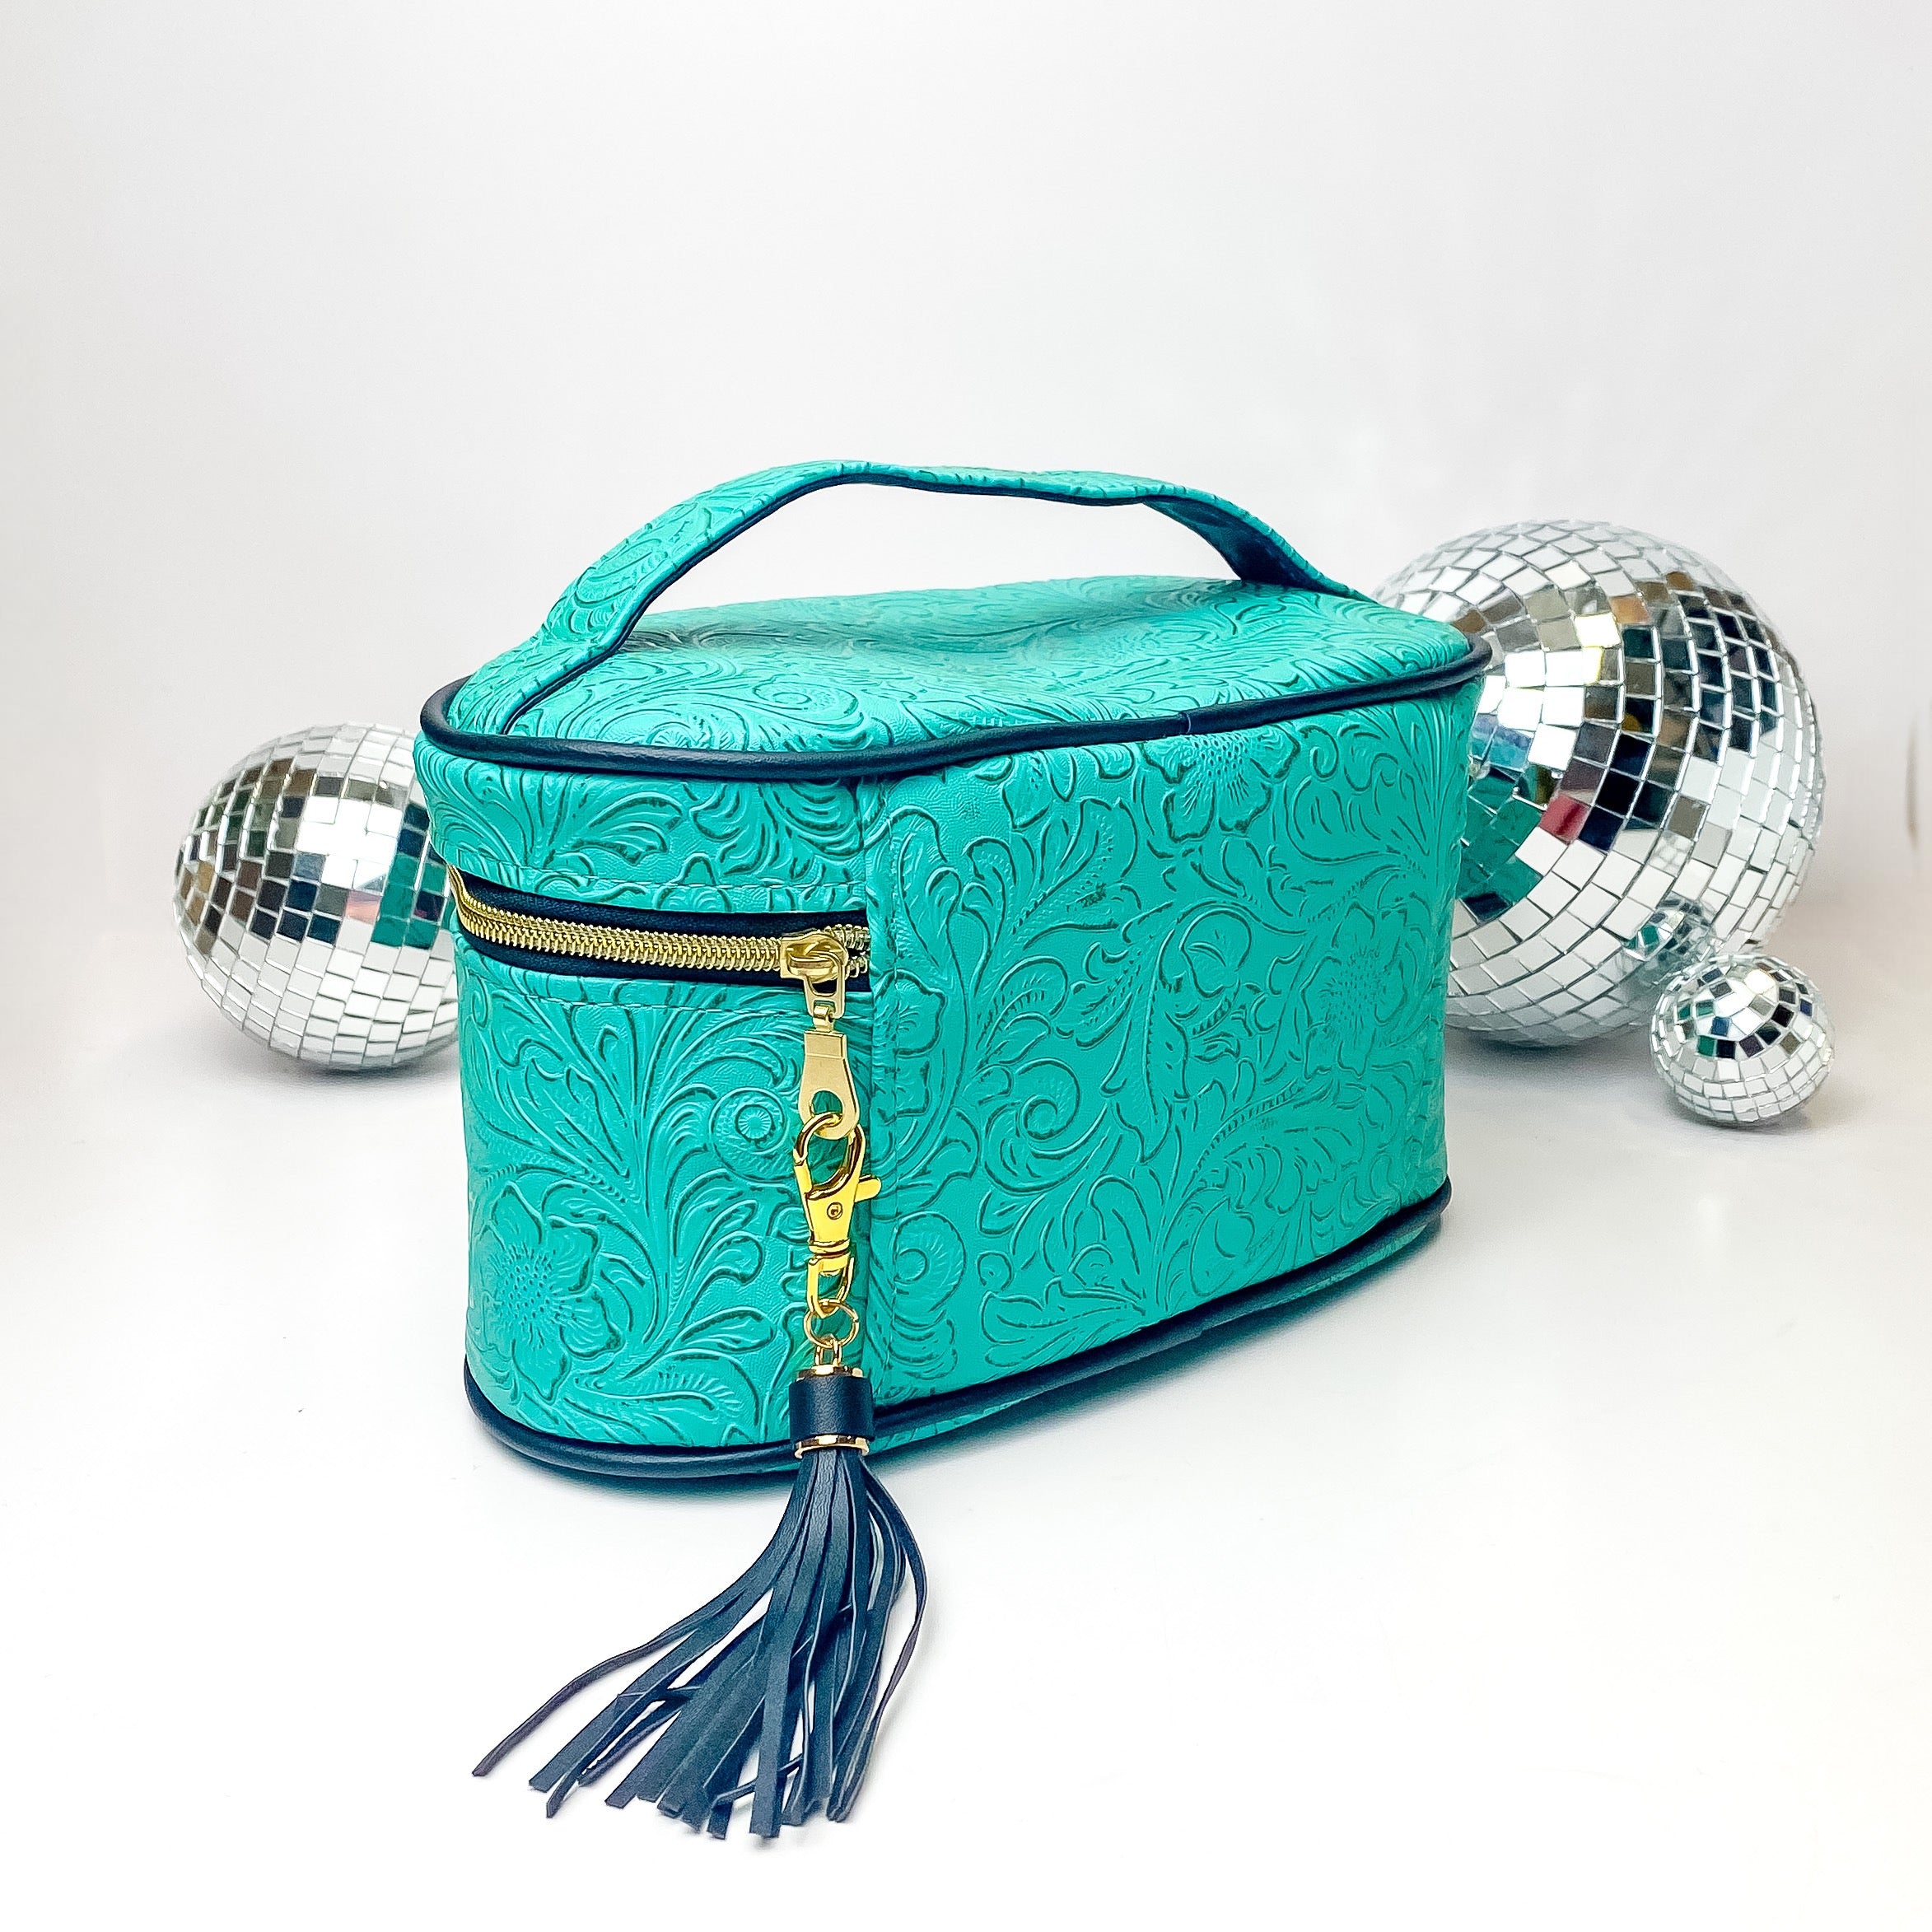 Makeup Junkie | Medium Turquoise Dream Train Case in Turquoise Green Tooled Print - Giddy Up Glamour Boutique